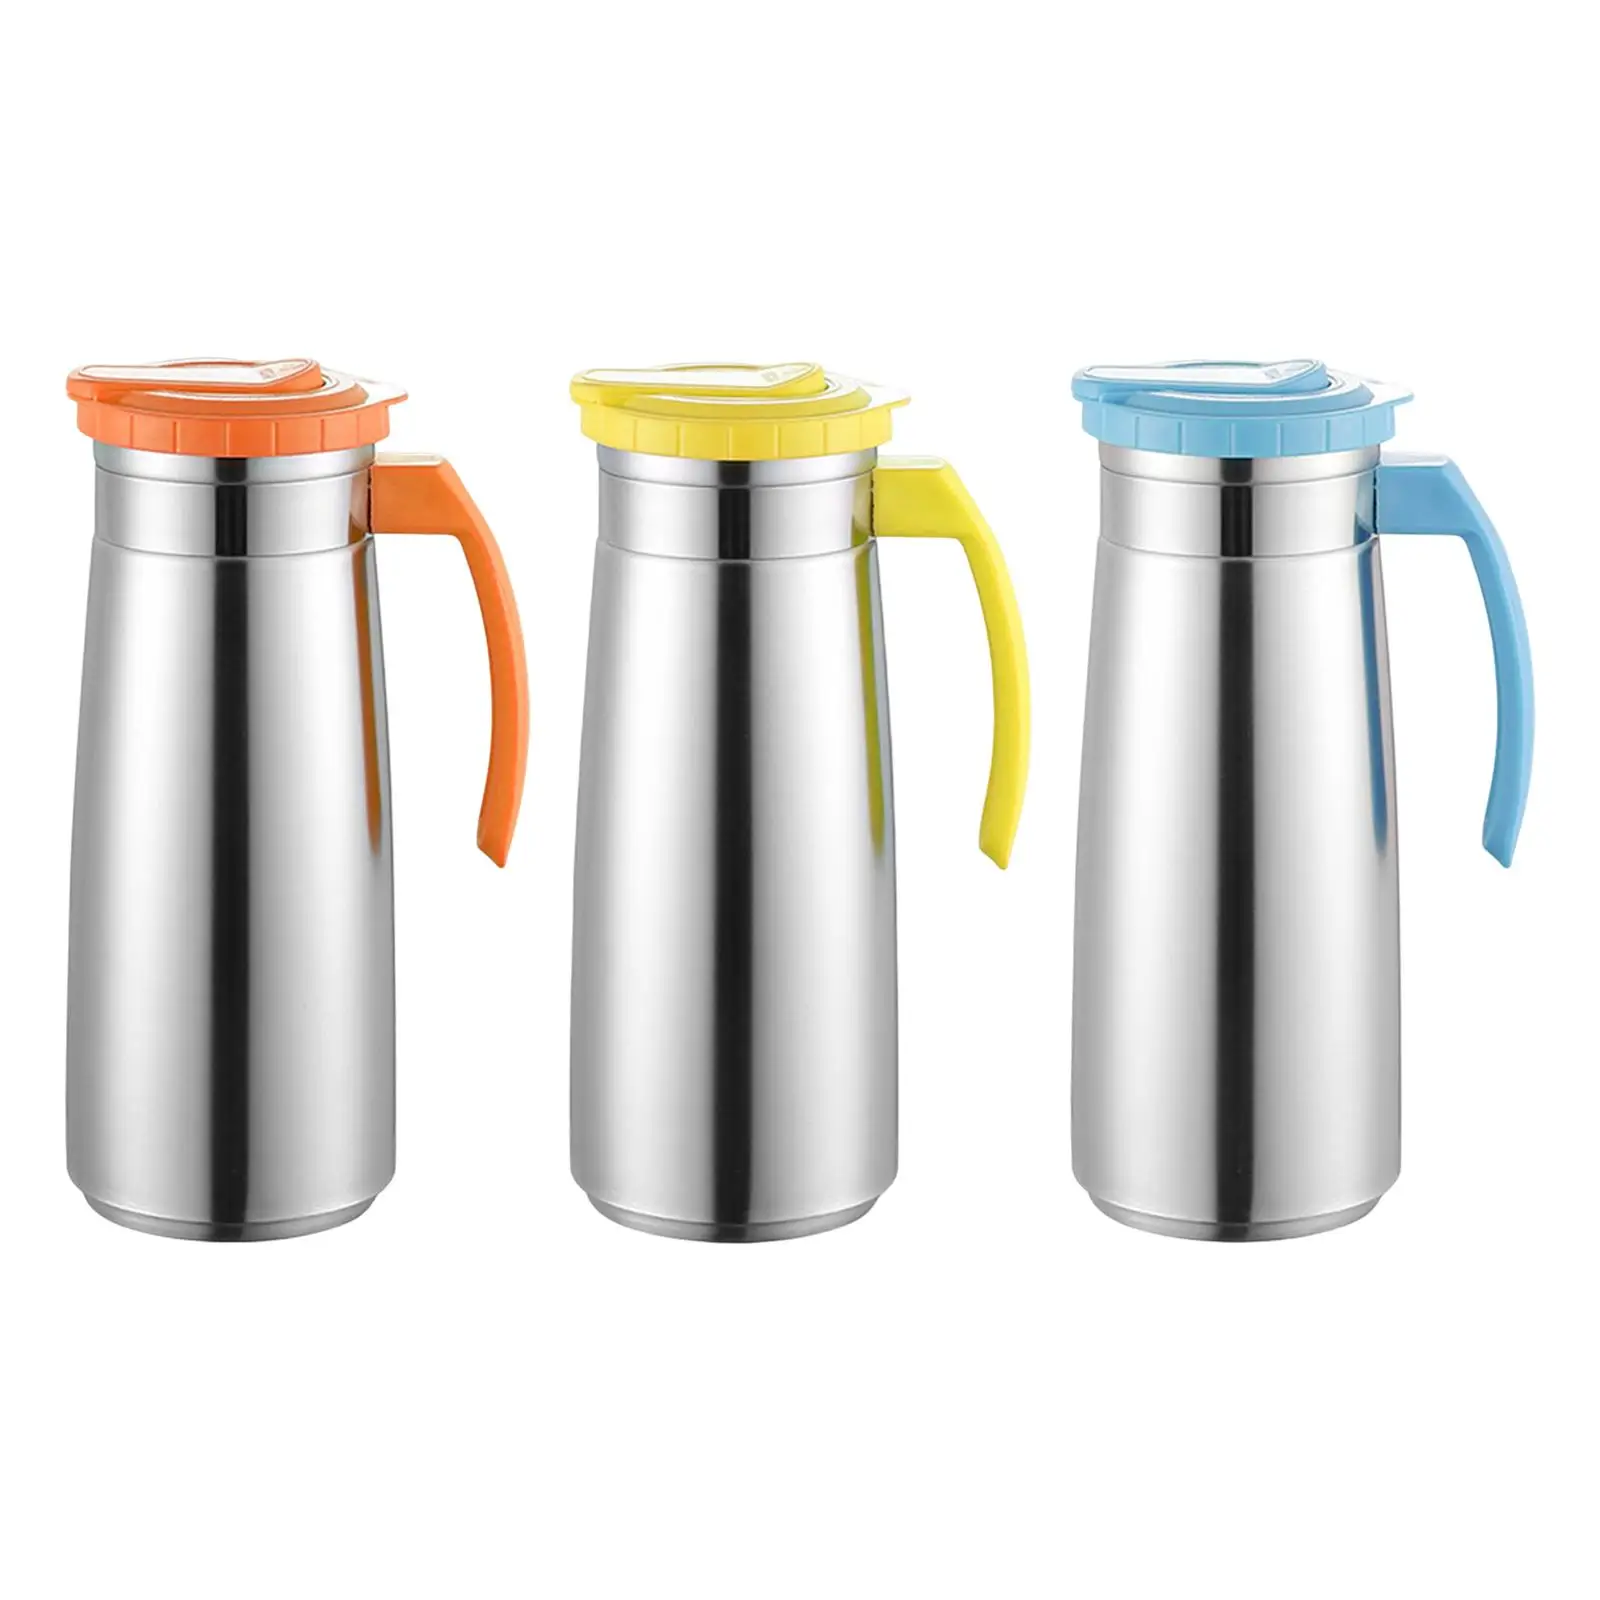 Stainless Steel Jug Tea Kettle High Temperature Resistant Water Pitcher for Party Kitchen Refrigerator Household Picnic